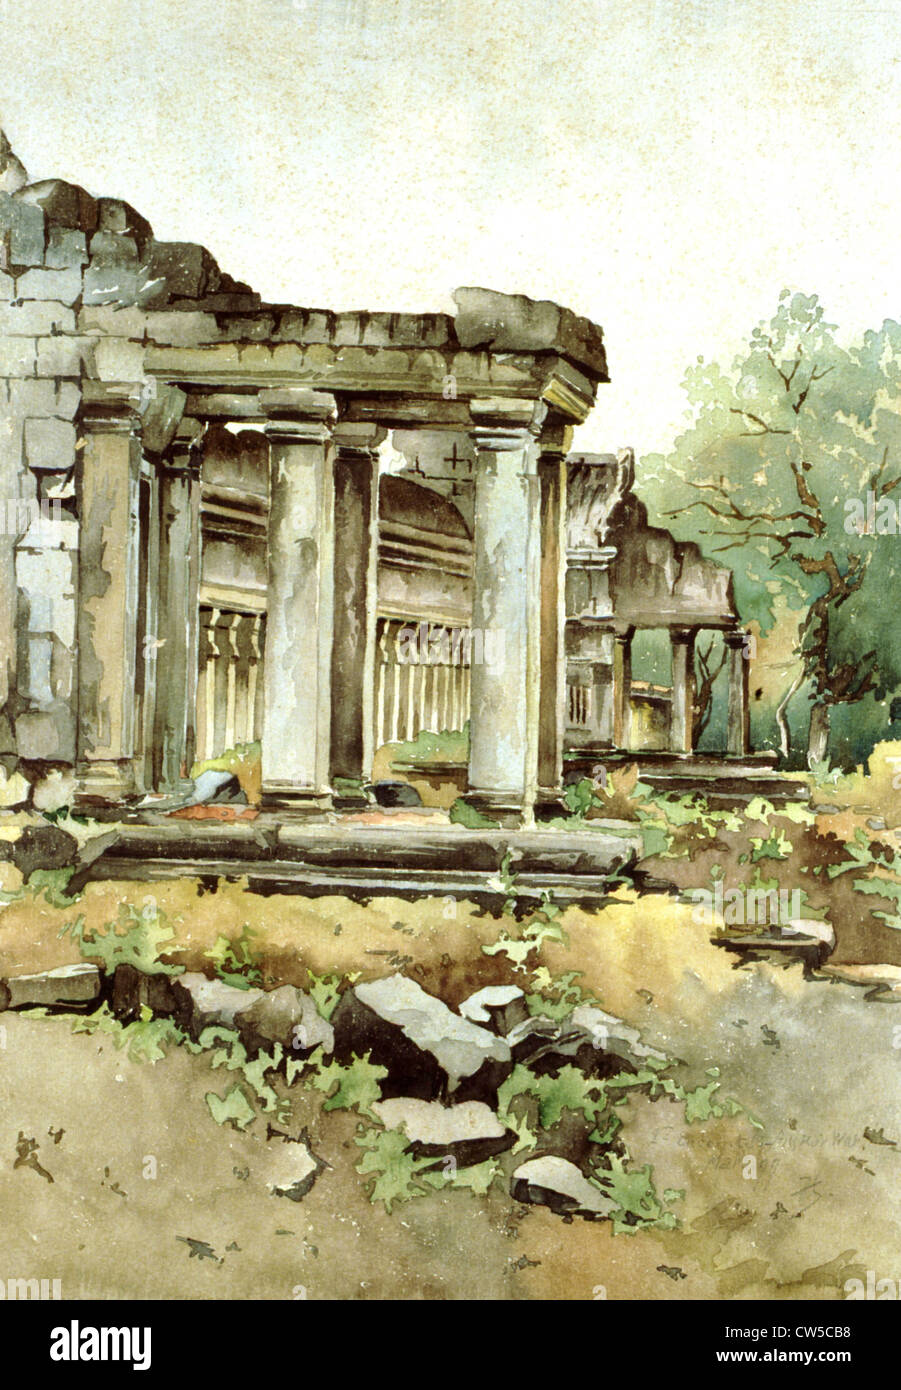 Courmaille, Angkor, aquarelle Banque D'Images